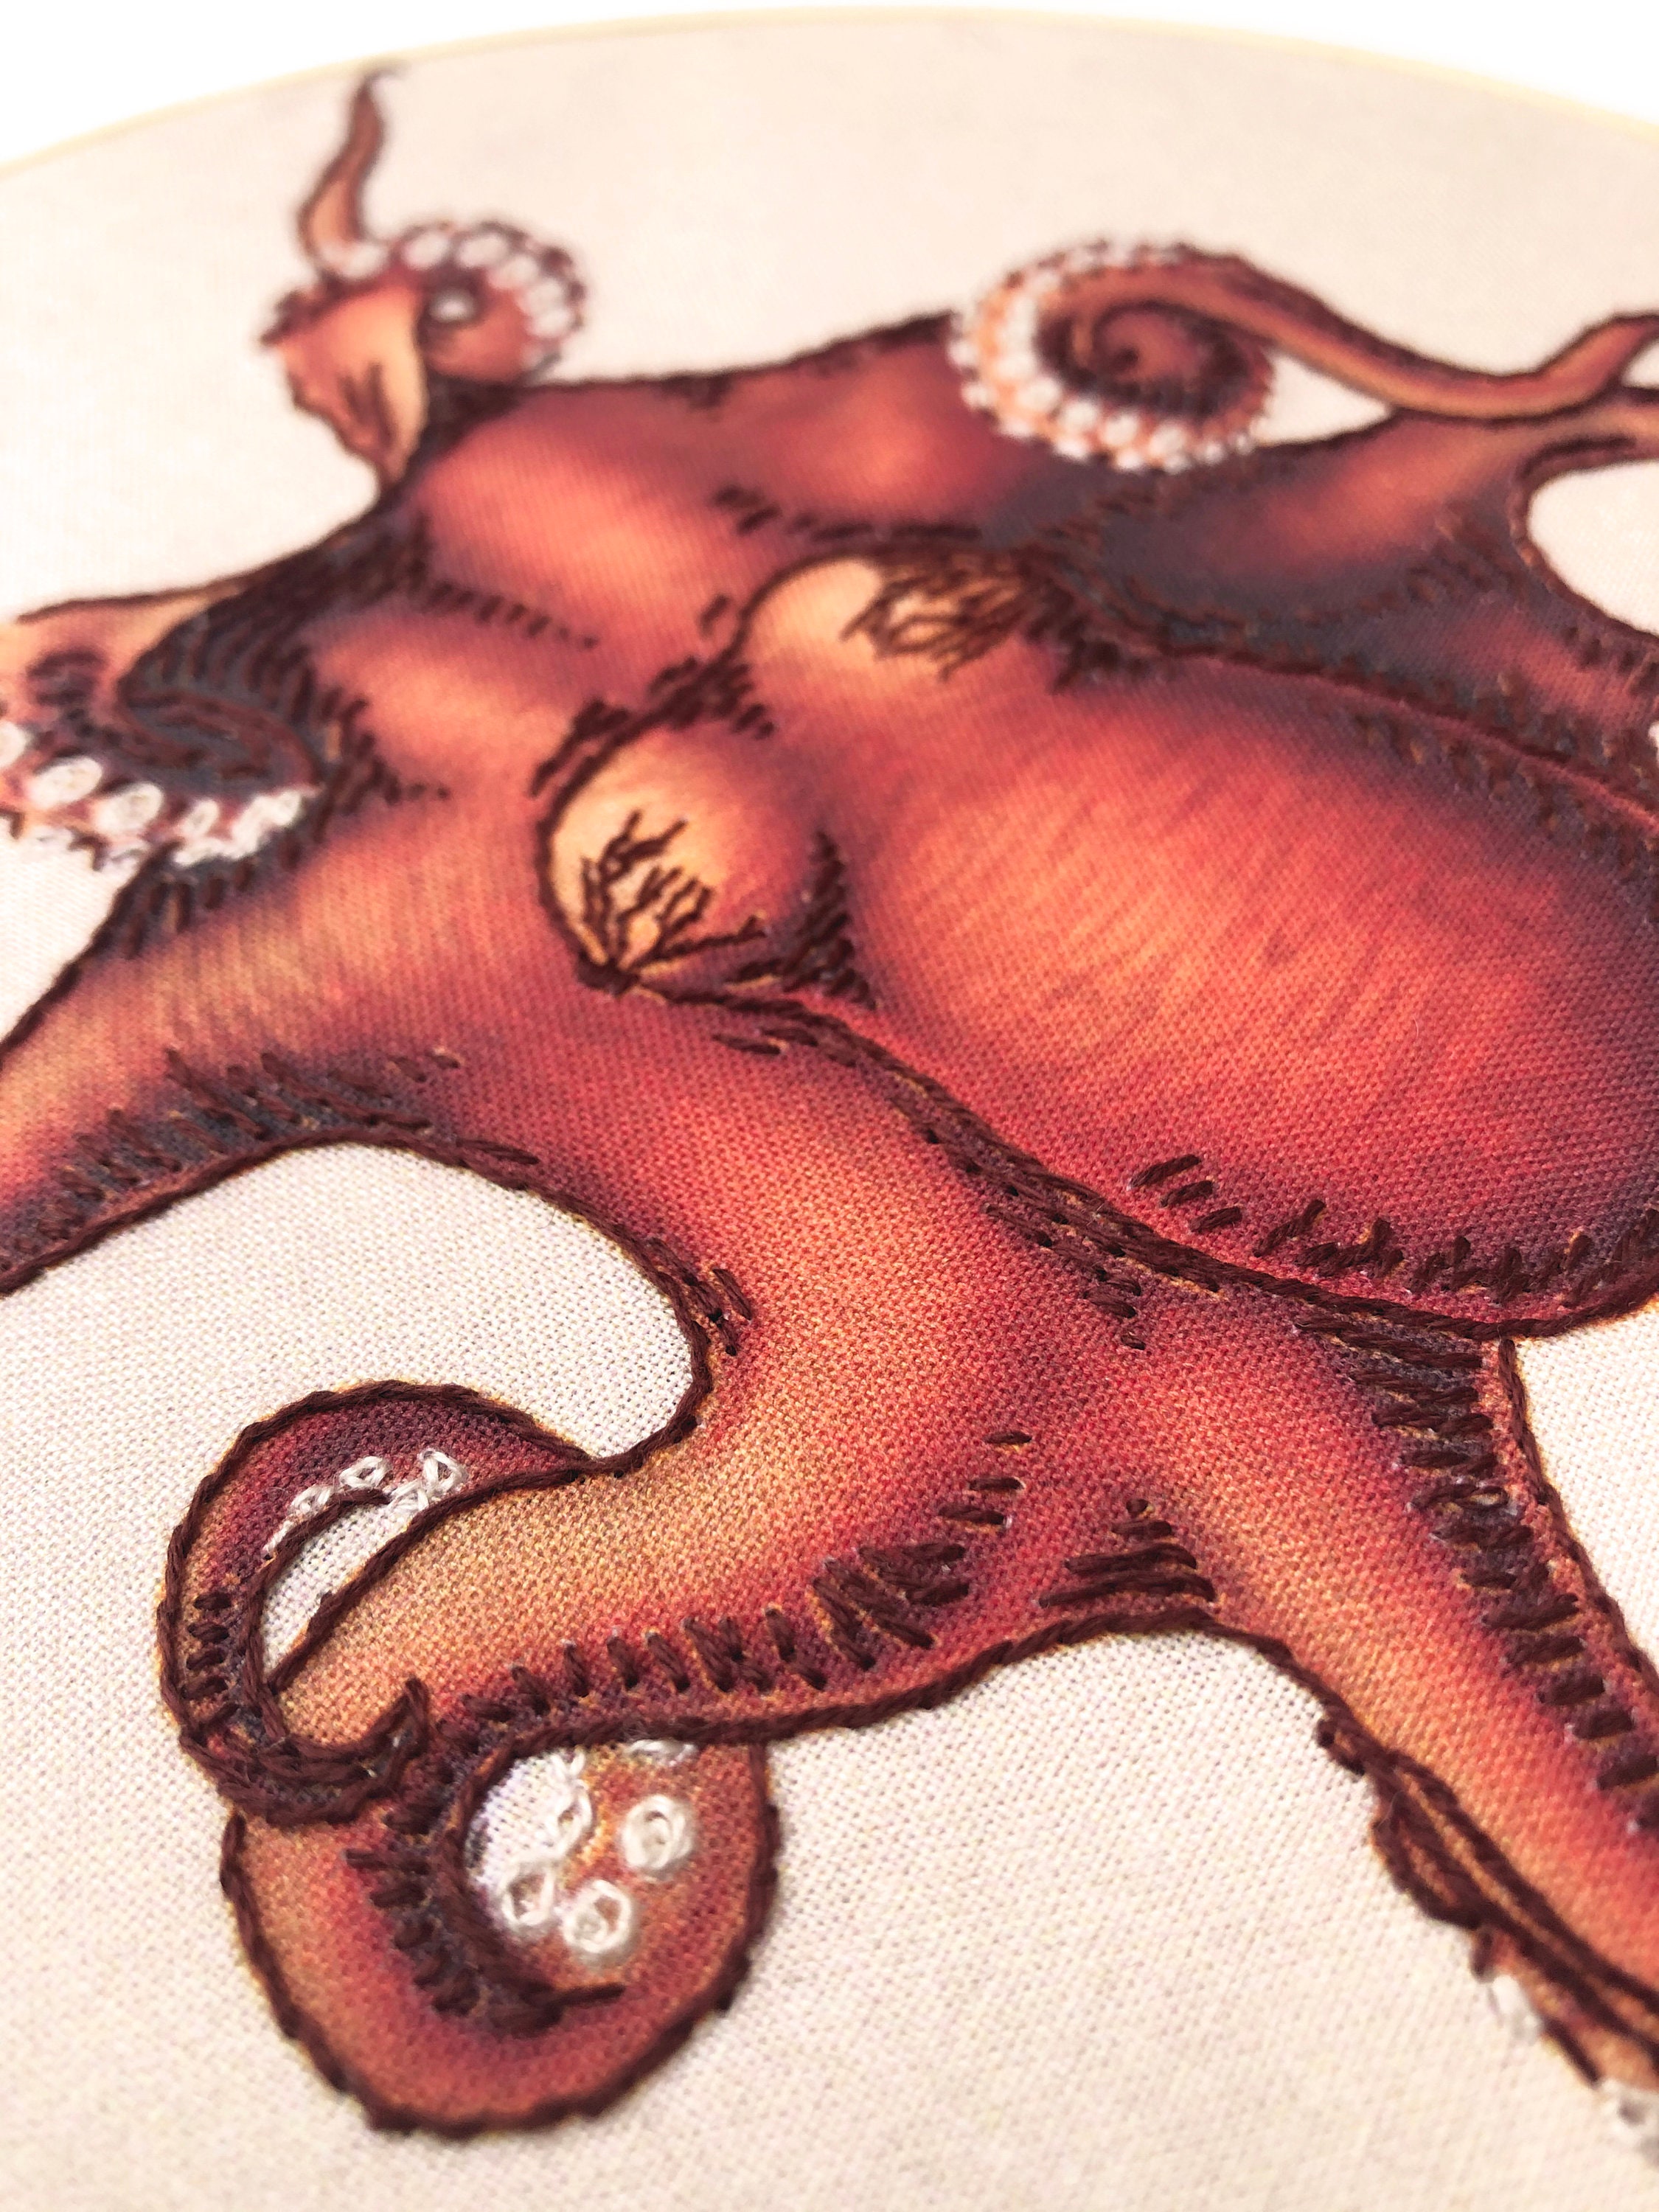 Beginner Embroidery Kit for Adults, Octopus, Science, Nautical, Marine,  Modern Embroidery Kit 